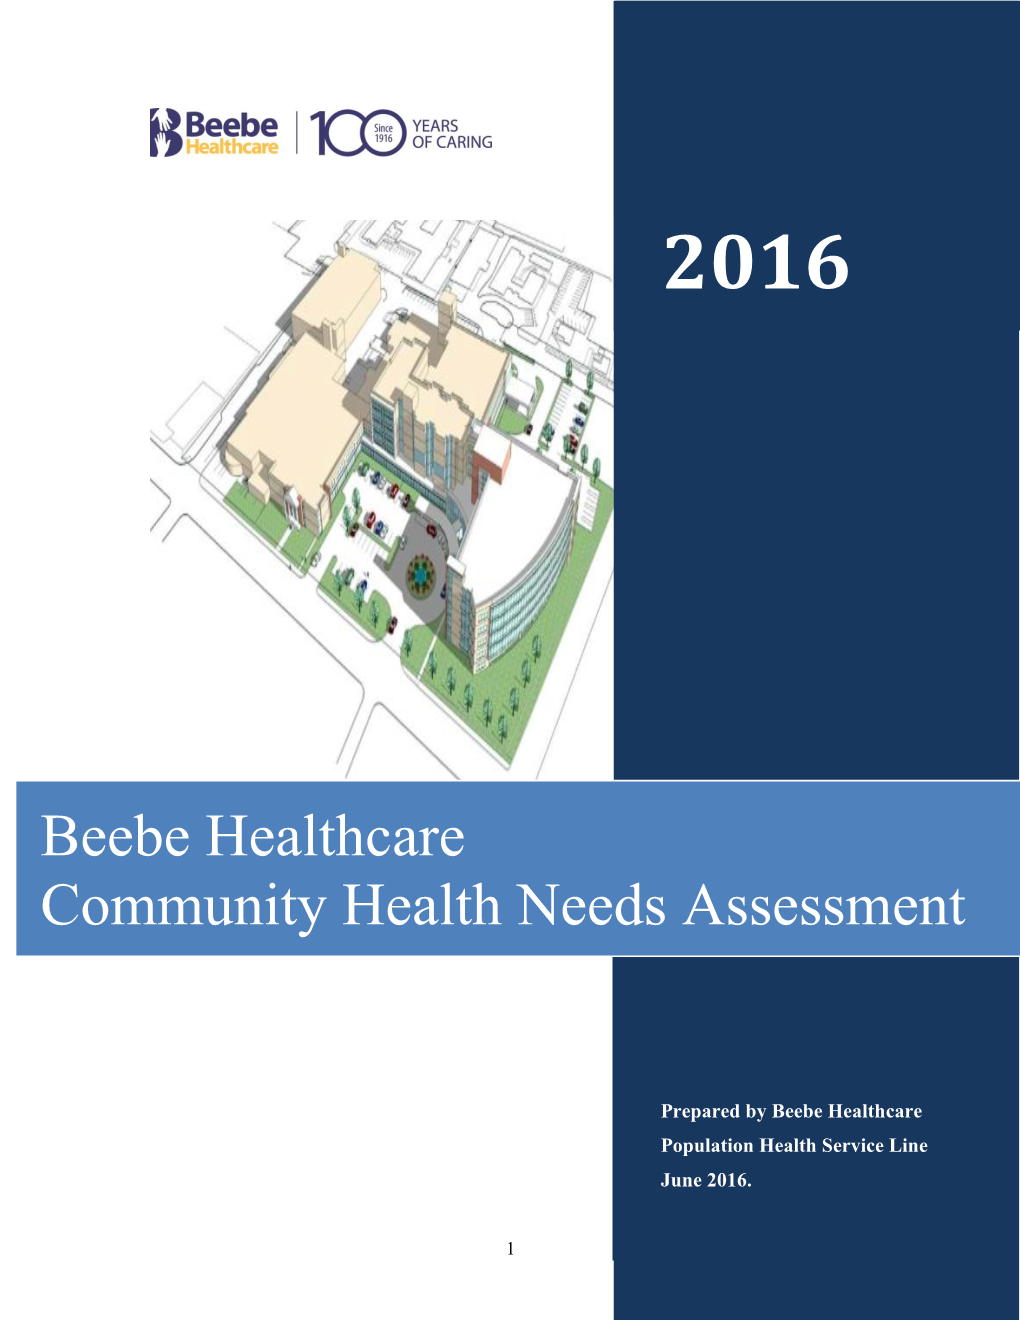 Beebe Healthcare Community Health Needs Assessment